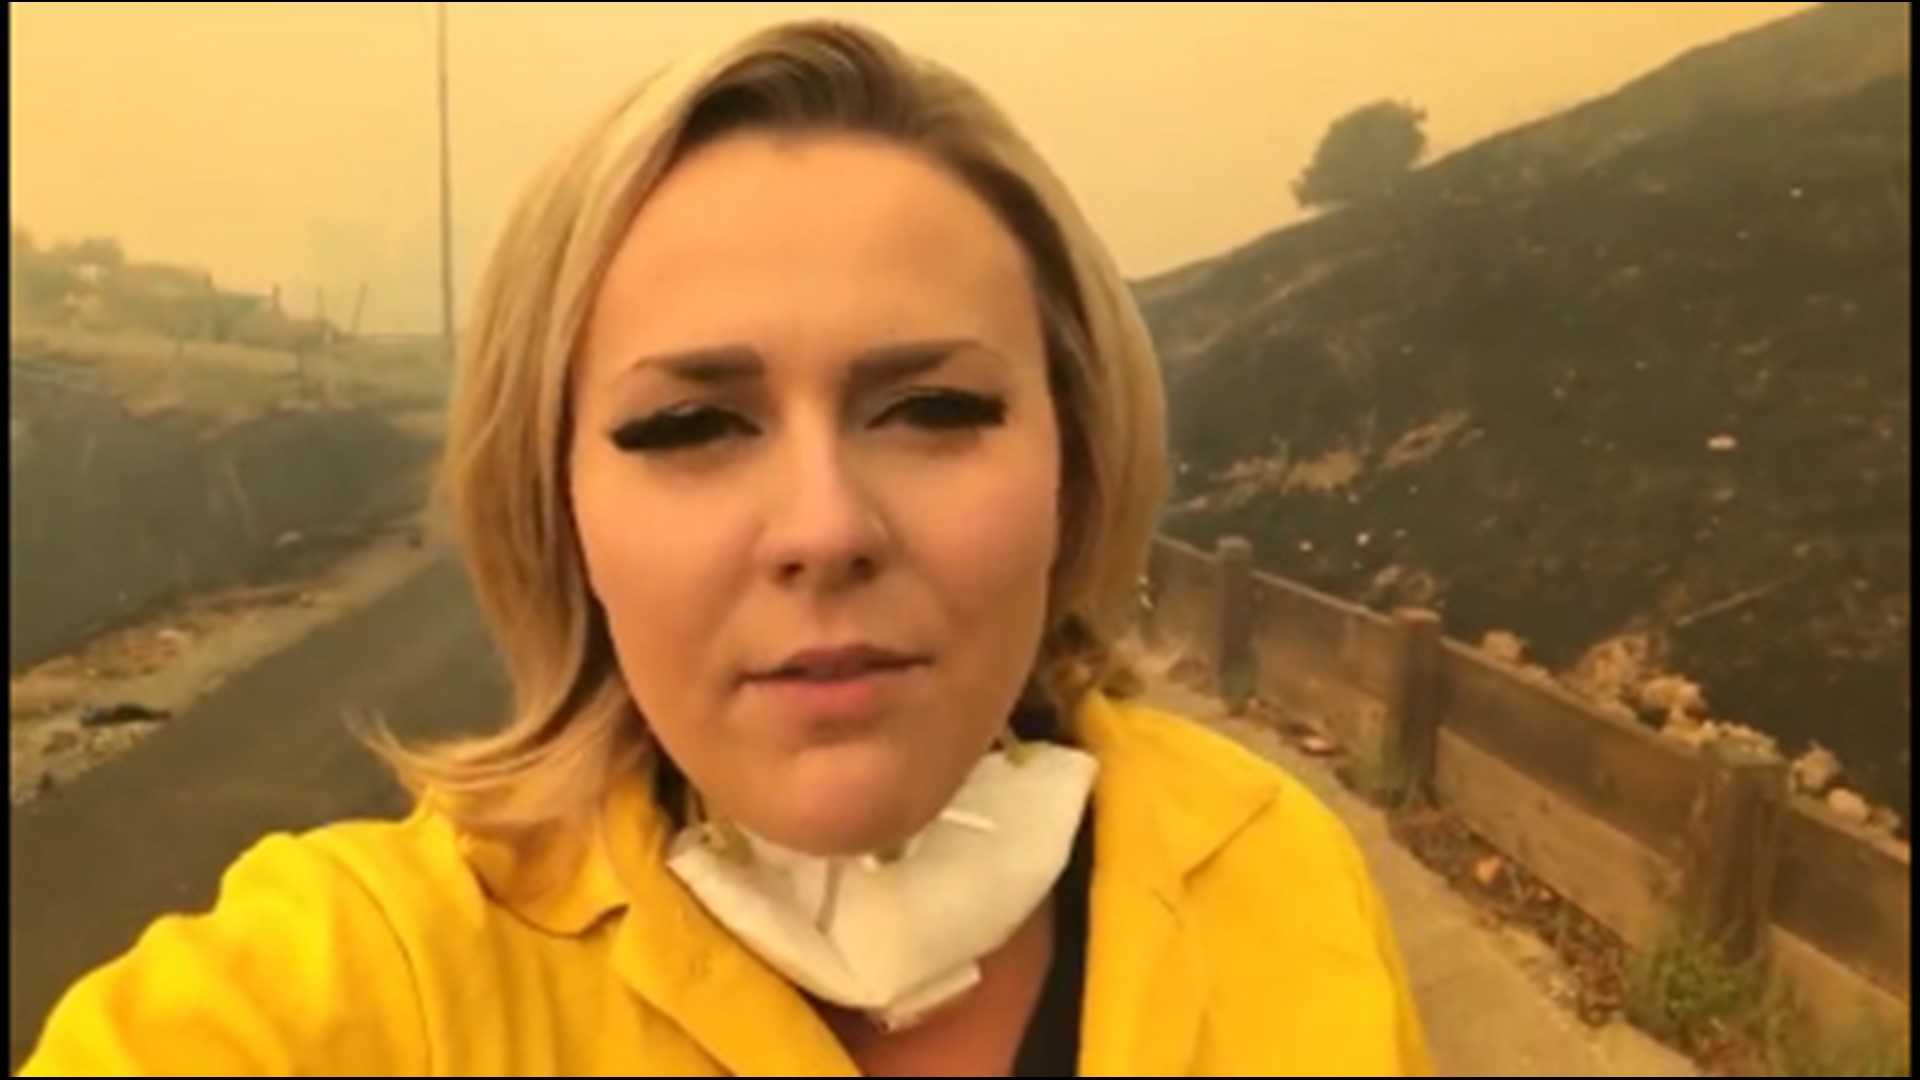 High winds and burning embers from the Kincade fire continue to wreak havoc near Healdsburg and Windsor. Lena Howland was live on Facebook.